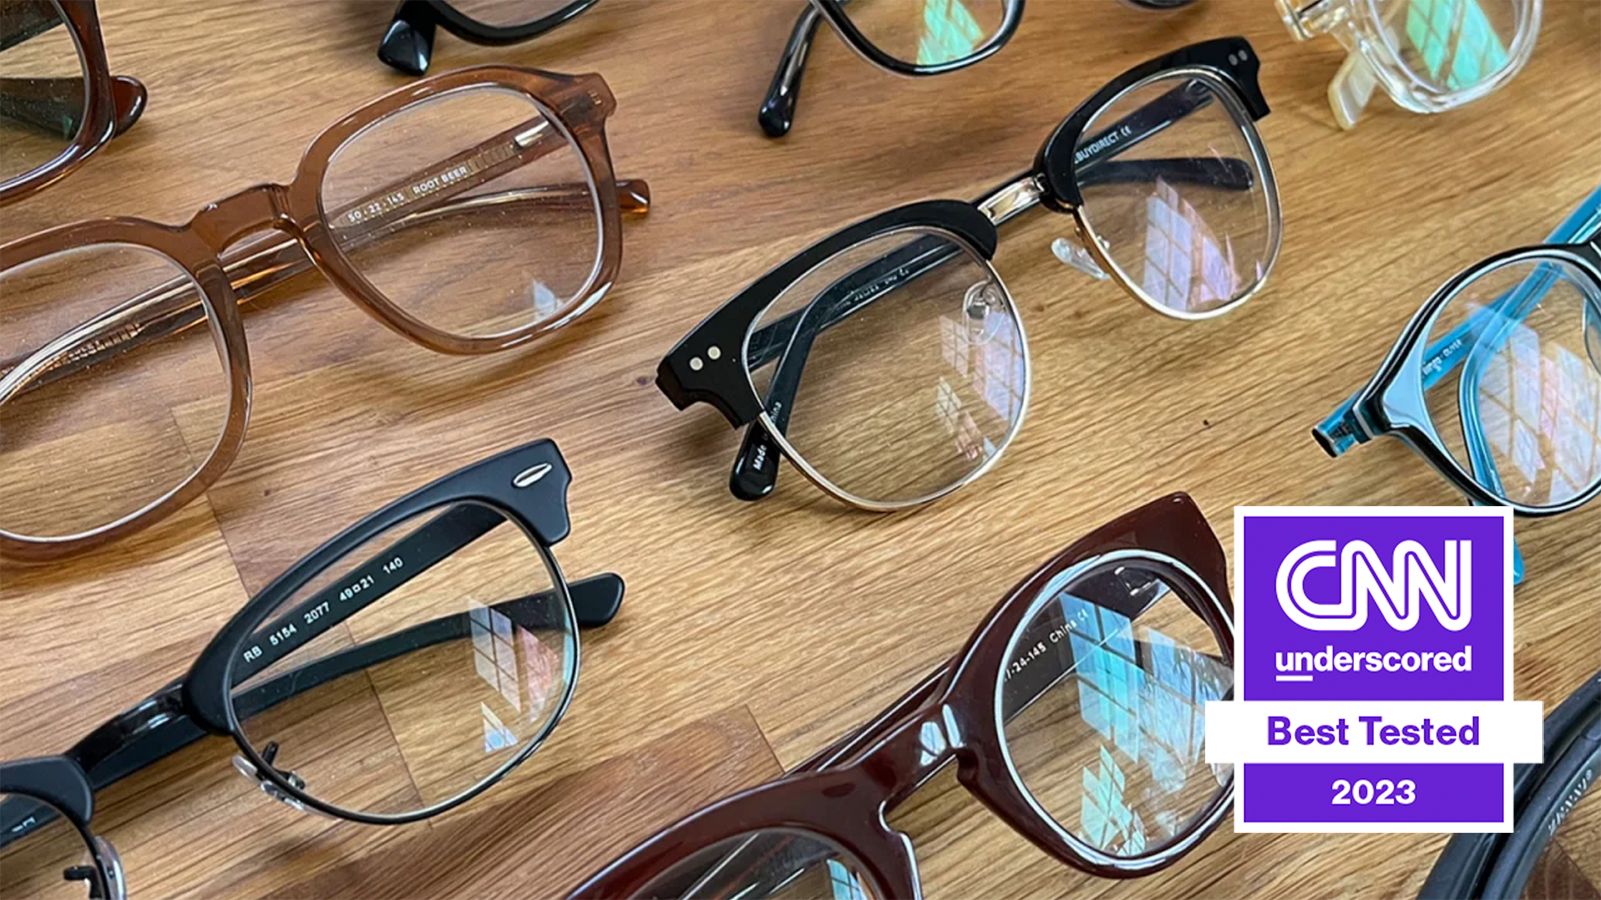 Zenni Optical Review: One Year Later